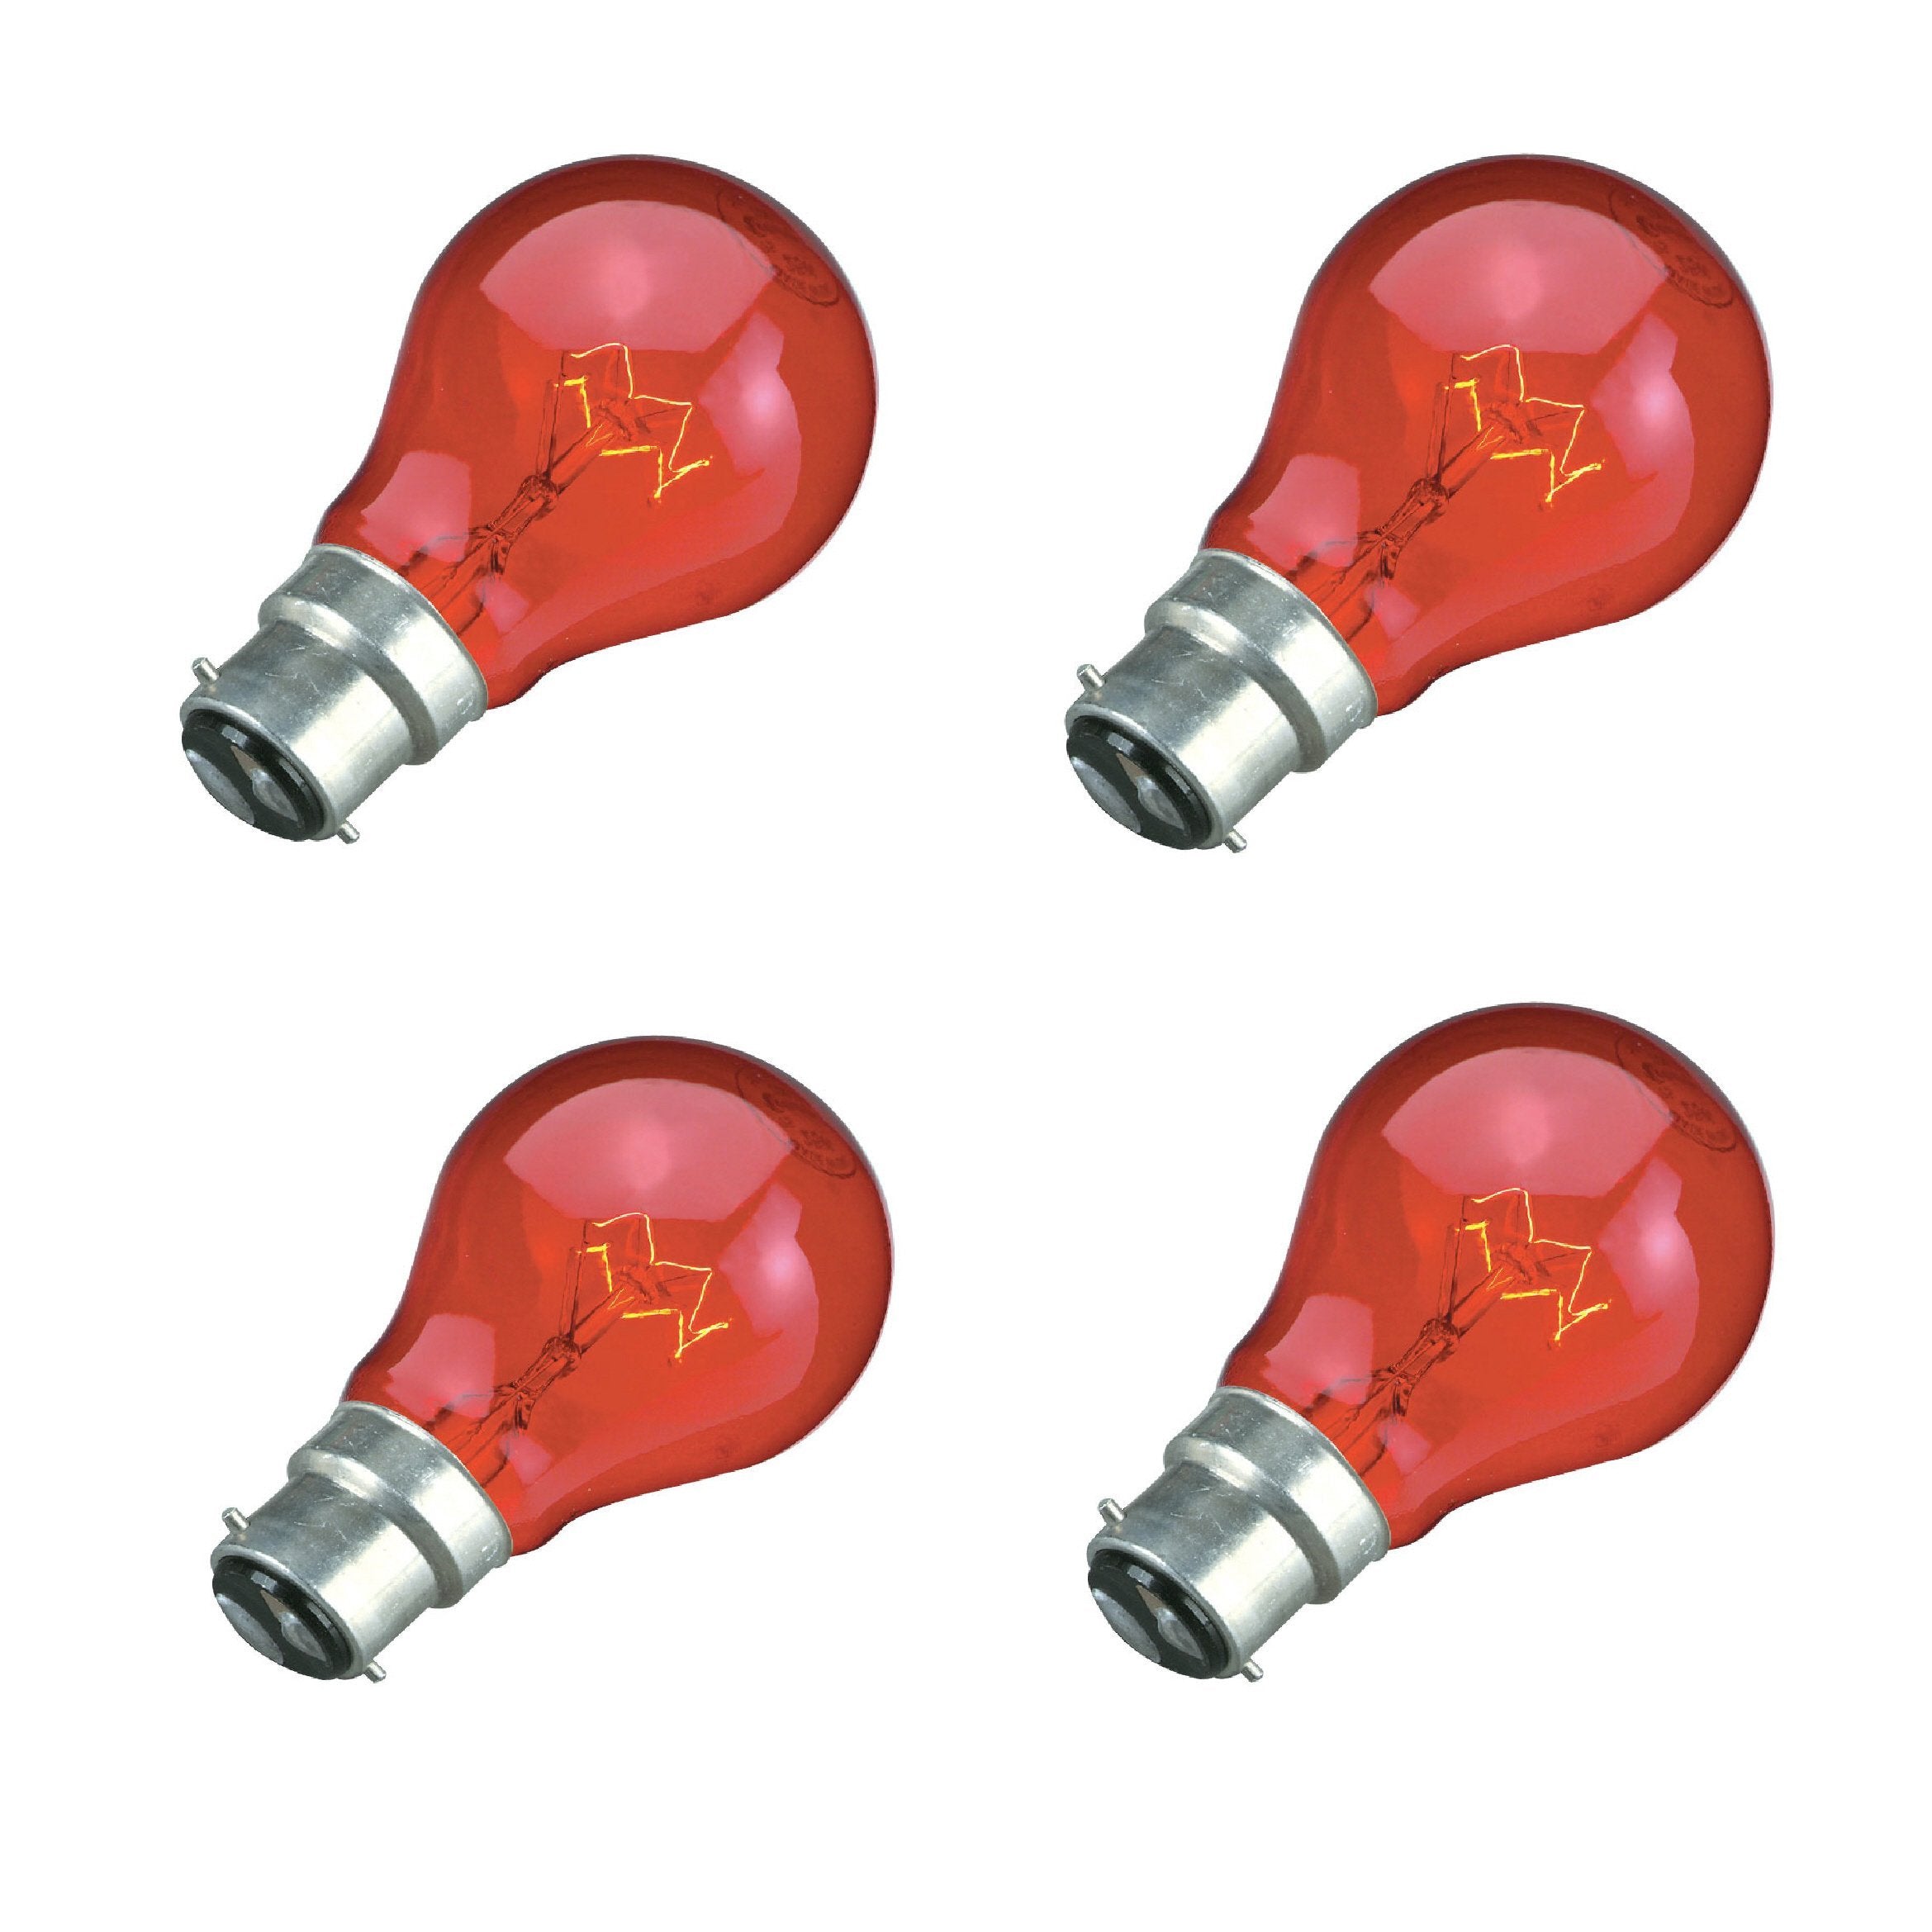 SupaLite 4 x 60W Red Fireglow Light Bulbs Bayonet BC B22 for Flame Effect Electric Fires